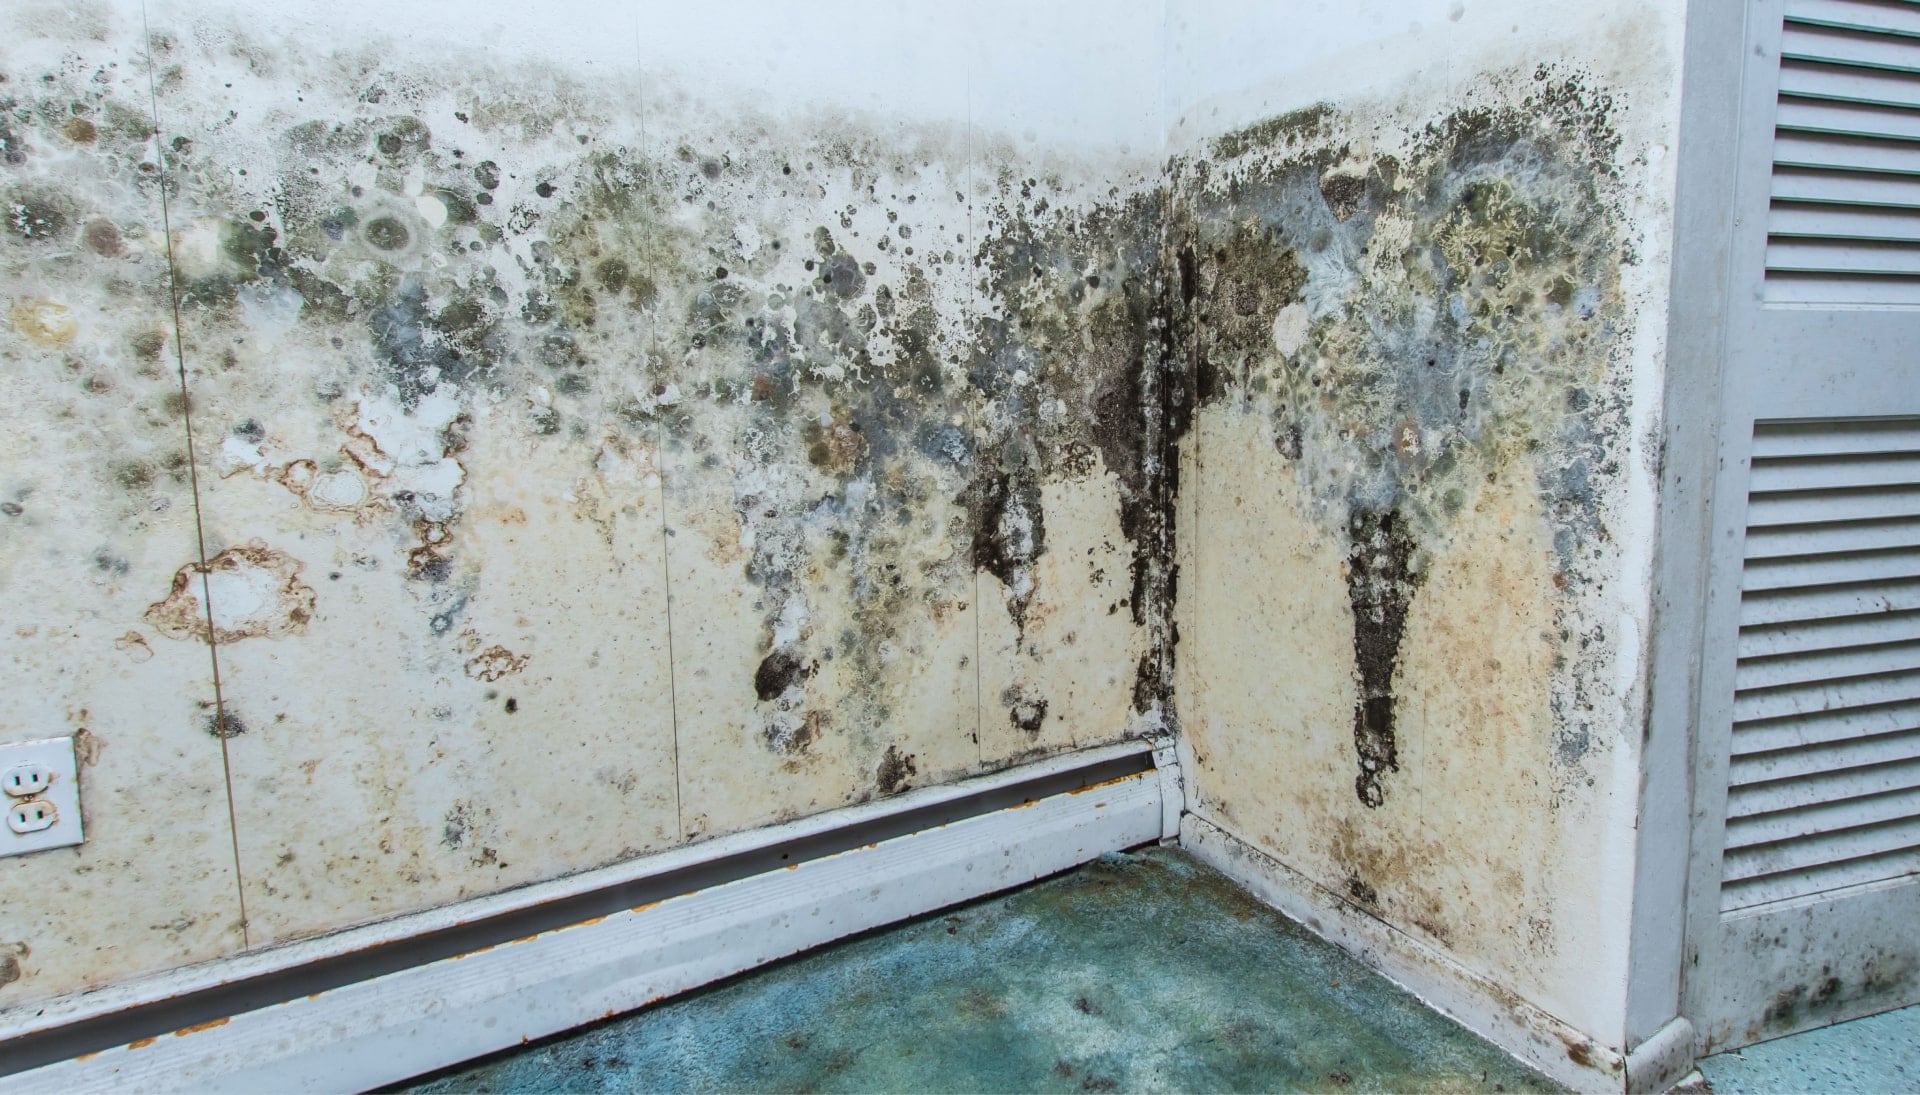 Professional mold removal, odor control, and water damage restoration service in Portland, Oregon.